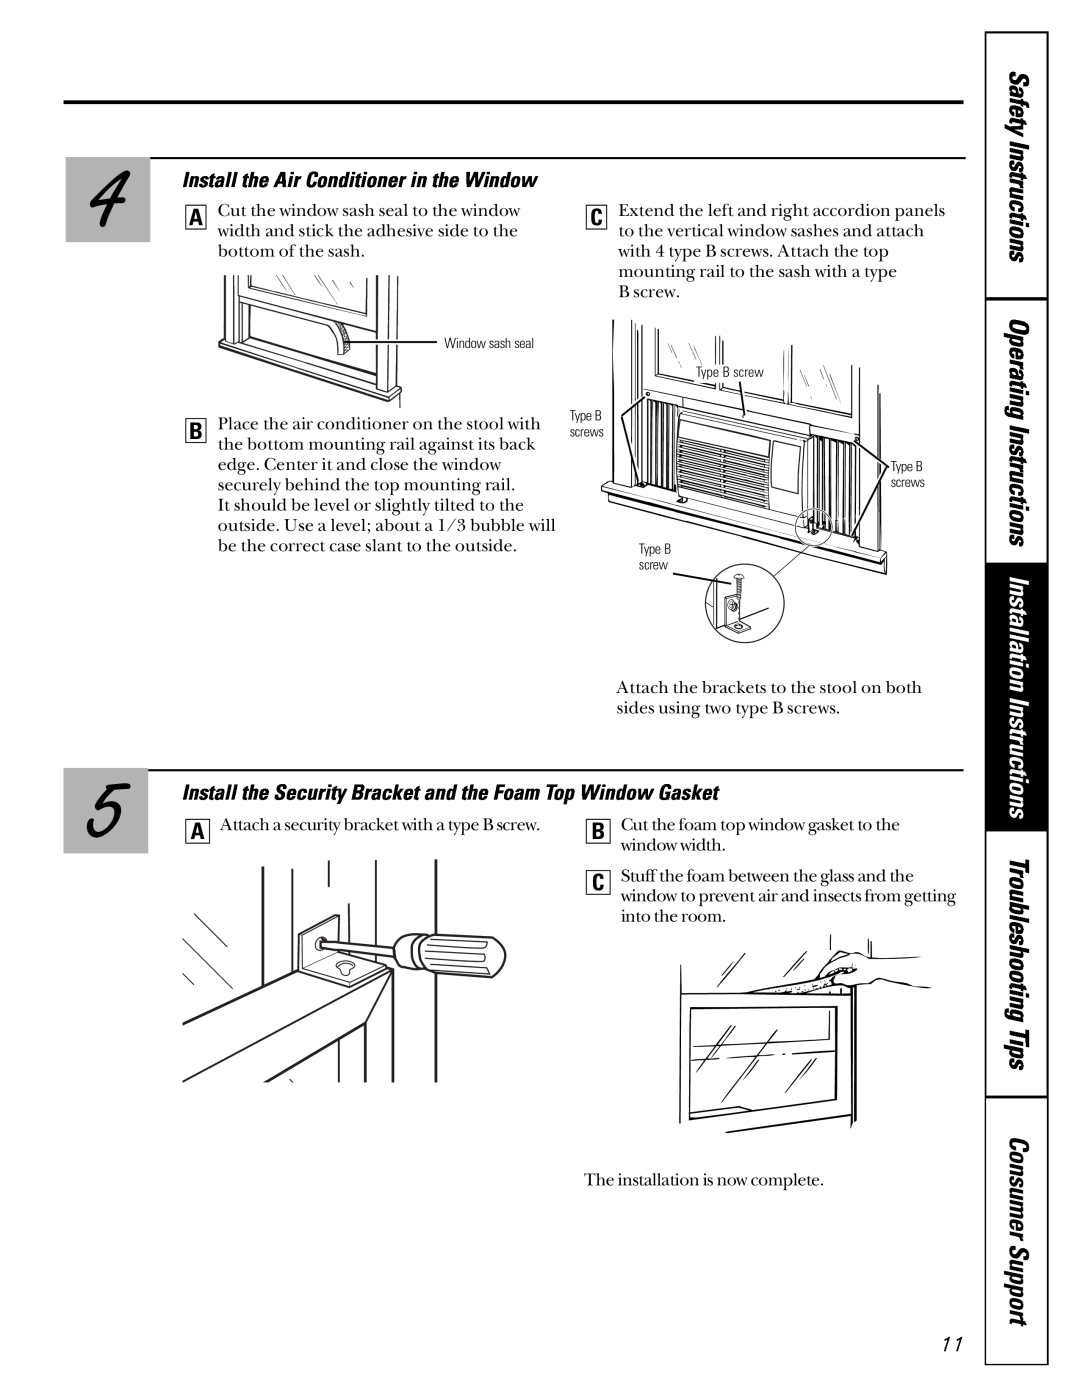 GE AST06, ASP05 Safety Instructions, Install the Air Conditioner in the Window, Operating Instructions Installation 